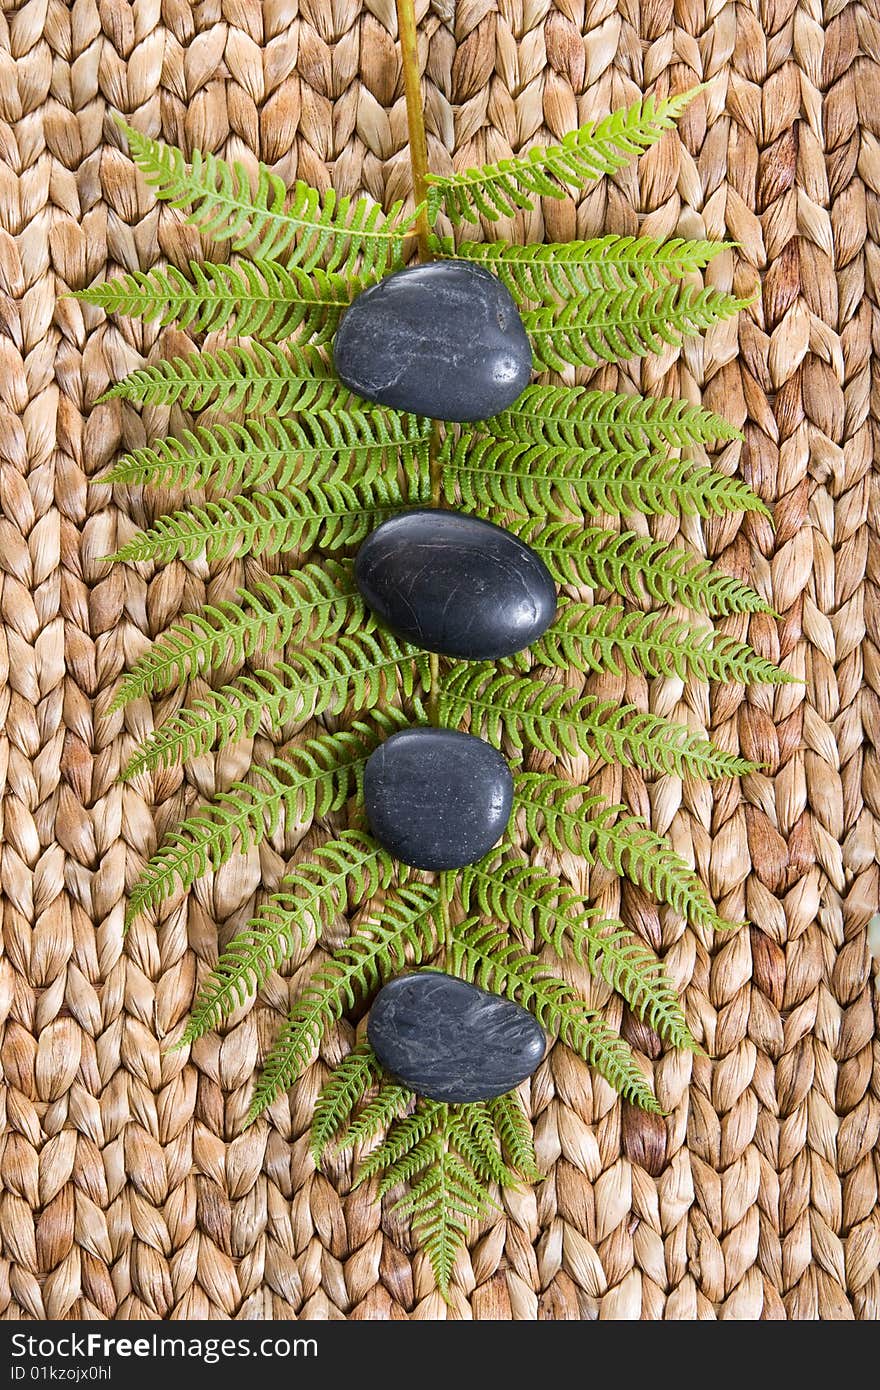 Zen Stones on a grass mat with a fern isolated on white